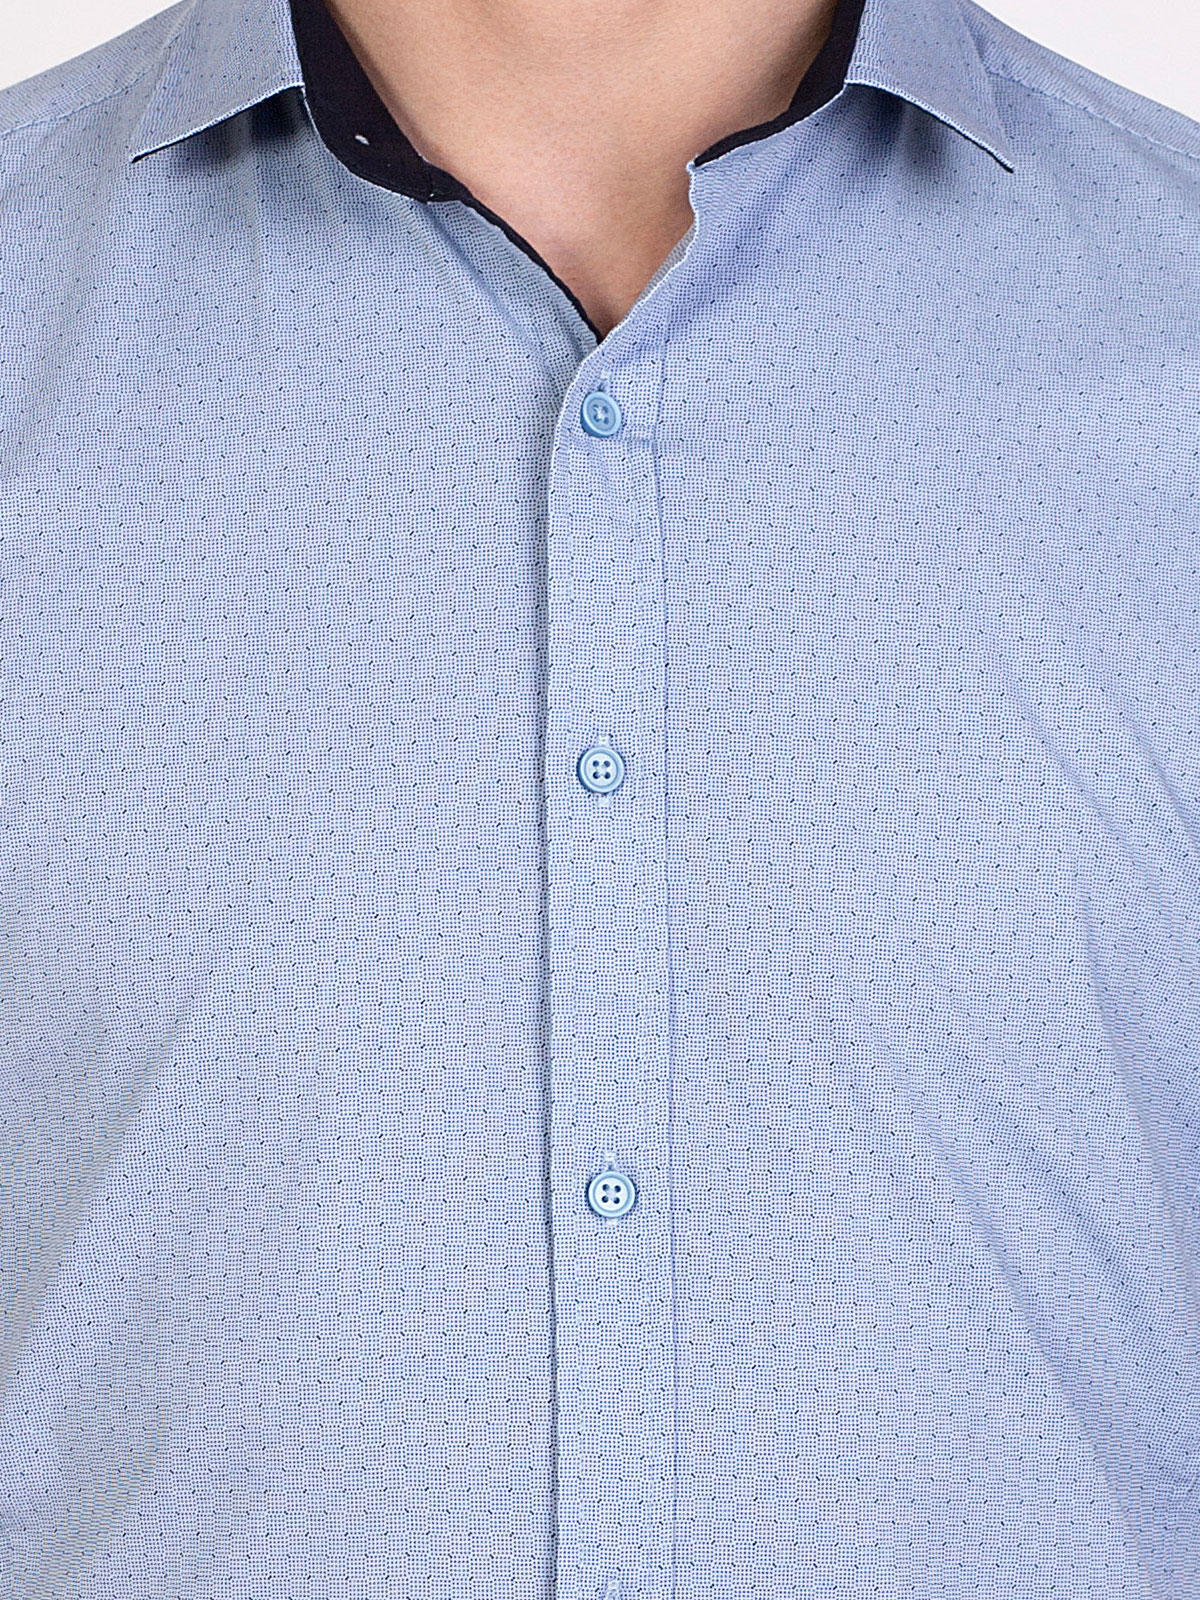 Dotted shirt in light blue - 80205 € 11.25 img3